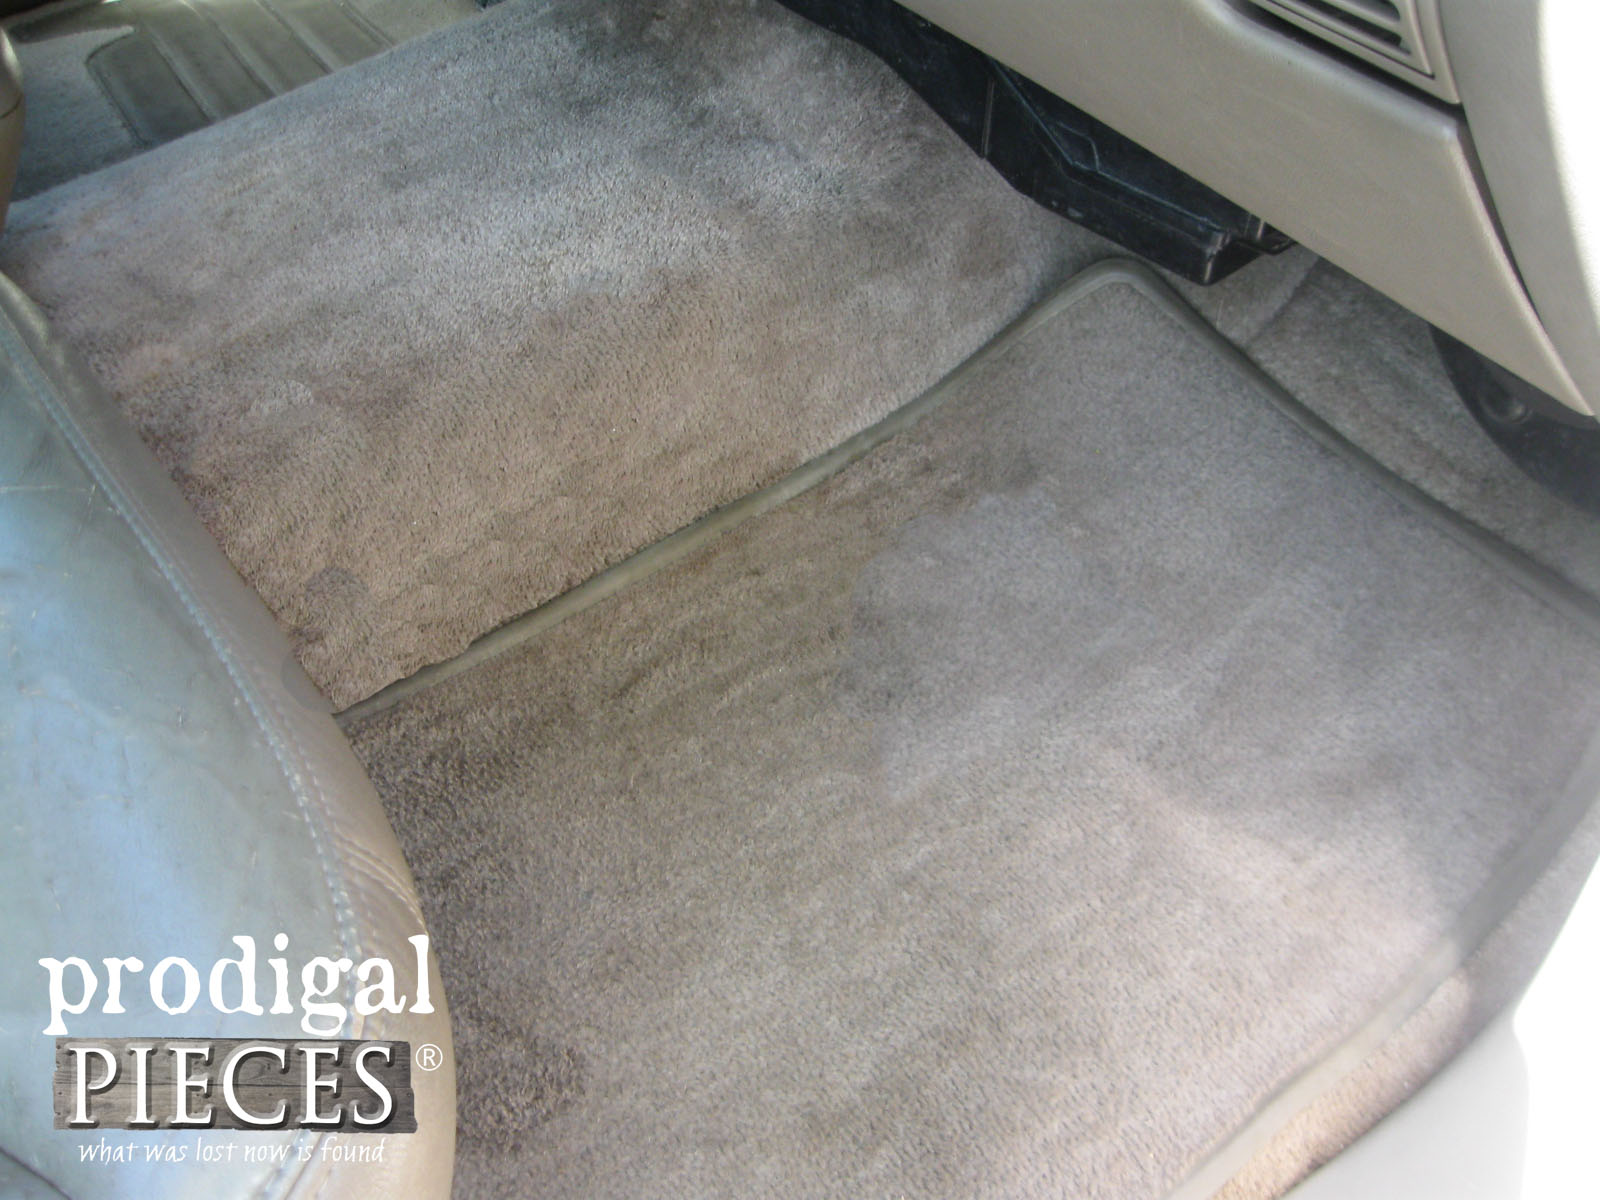 Vehicle Carpet After Chemical Free Cleaning Using the AutoRight Steam Machine by Prodigal Pieces | www.prodigalpieces.com